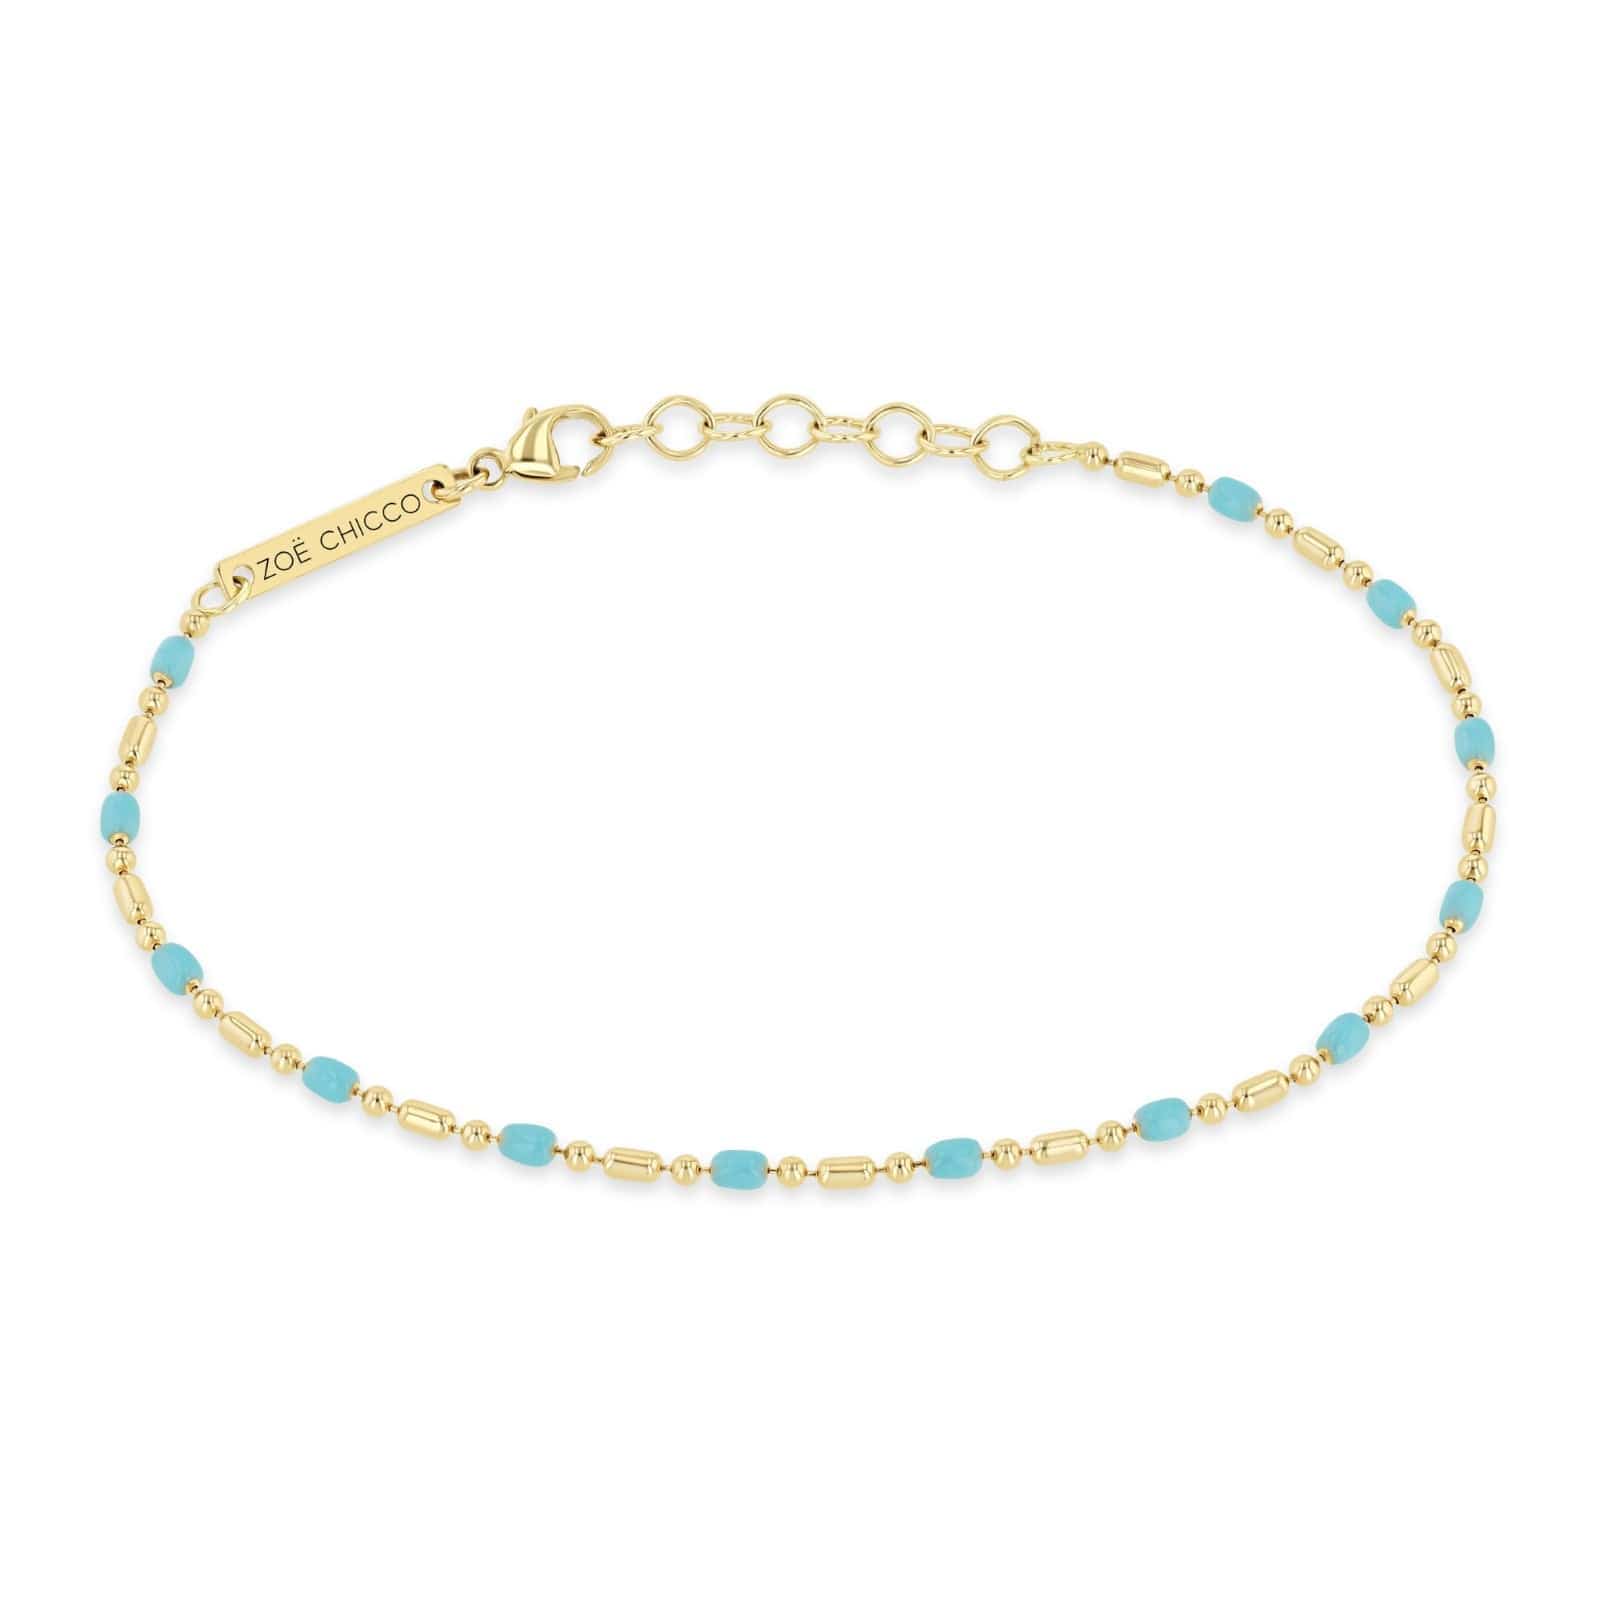 14K Yellow Gold Large Turquoise Bar and Bead Chain Bracelet